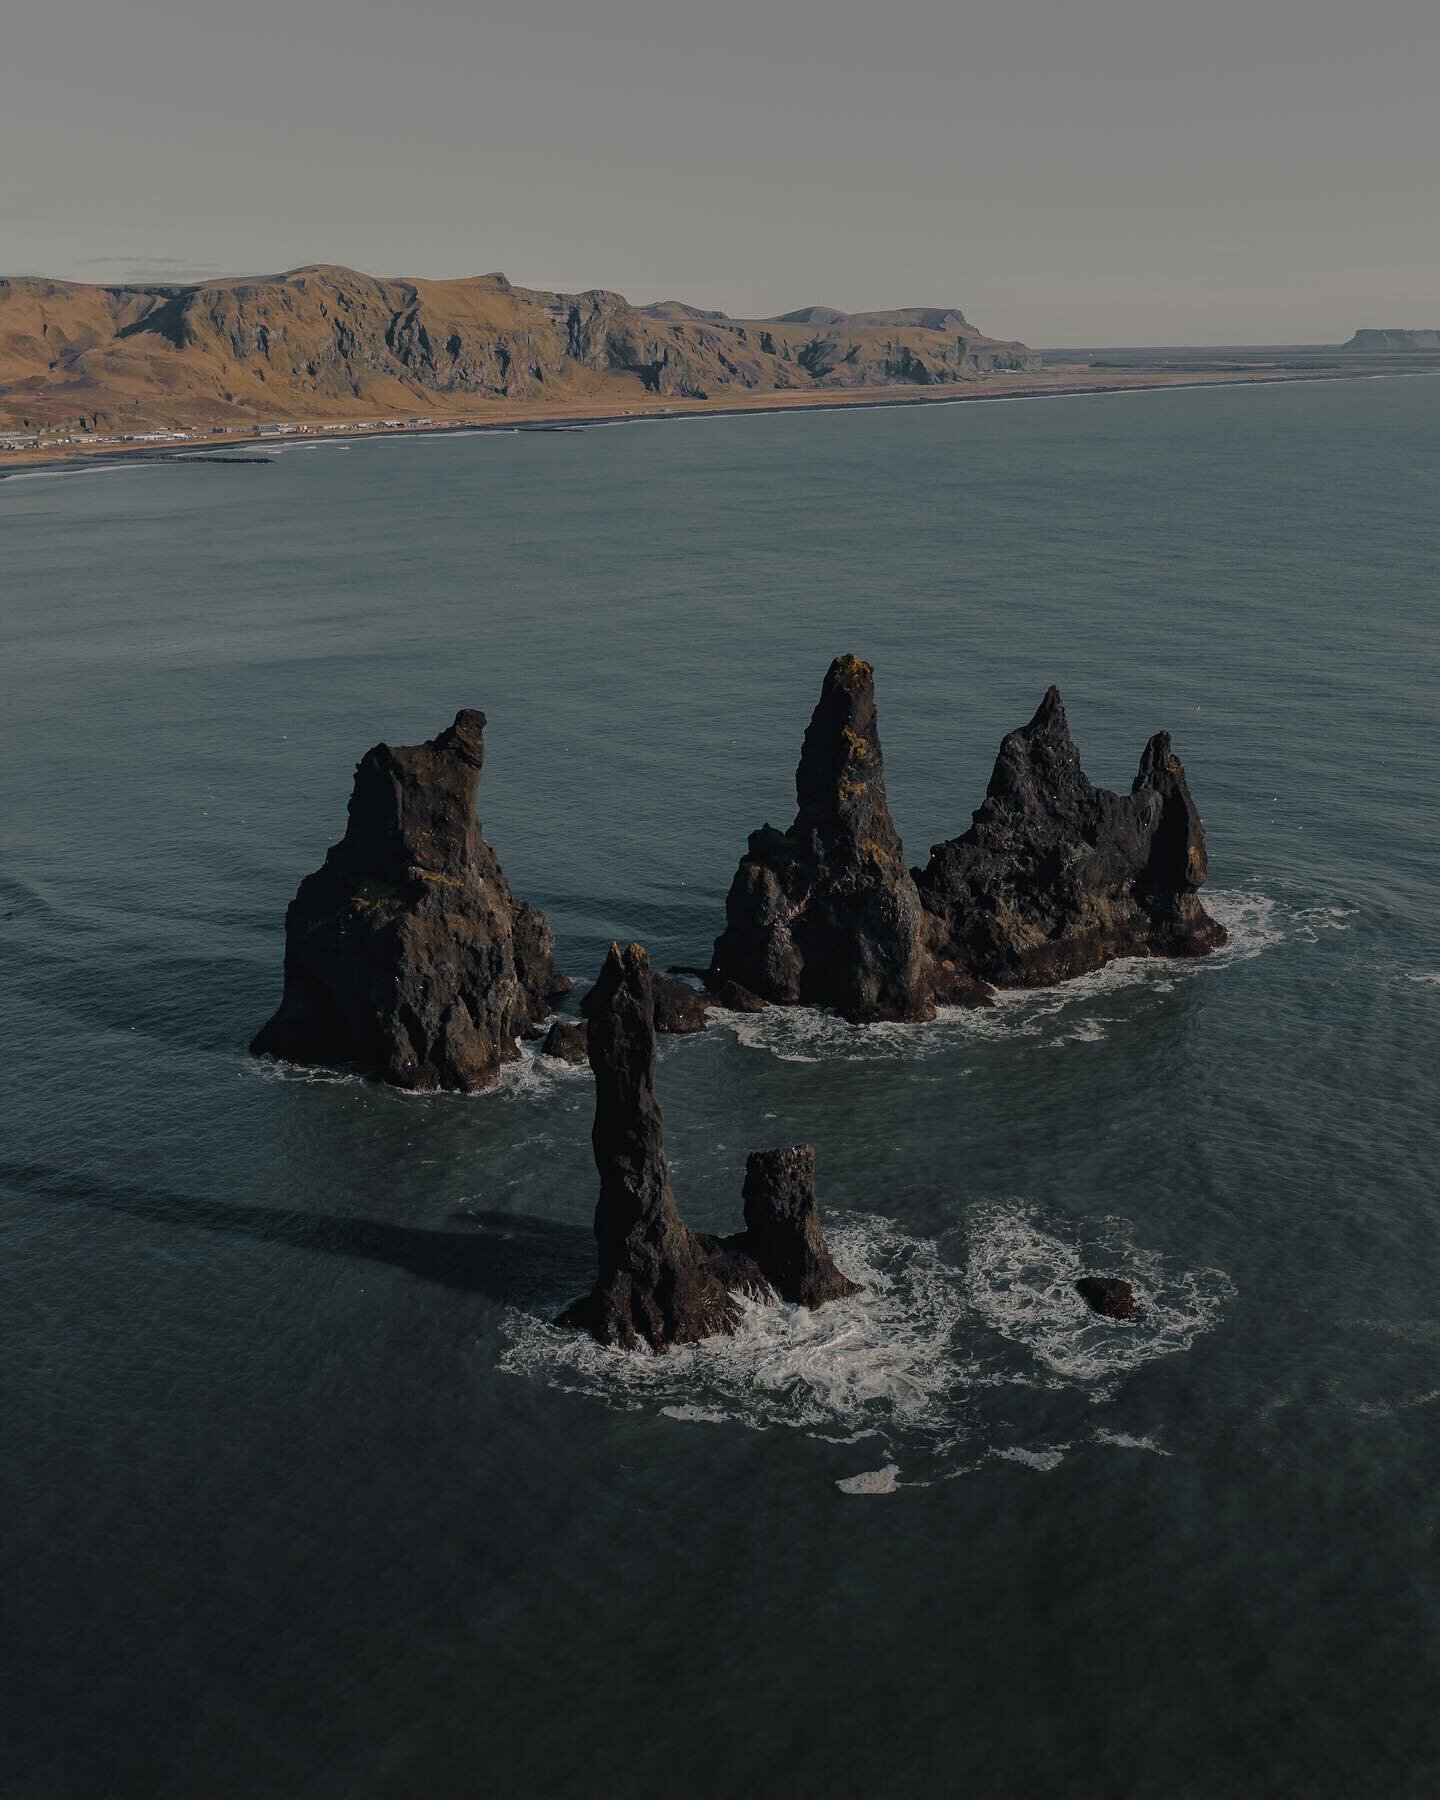 The best thing about Iceland is the diversity of the landscapes there. Not only do you have waterfalls, glaciers and volcanoes, but also a stunning coastline with some super striking features. These sea stacks are huge in real life - if you look clos